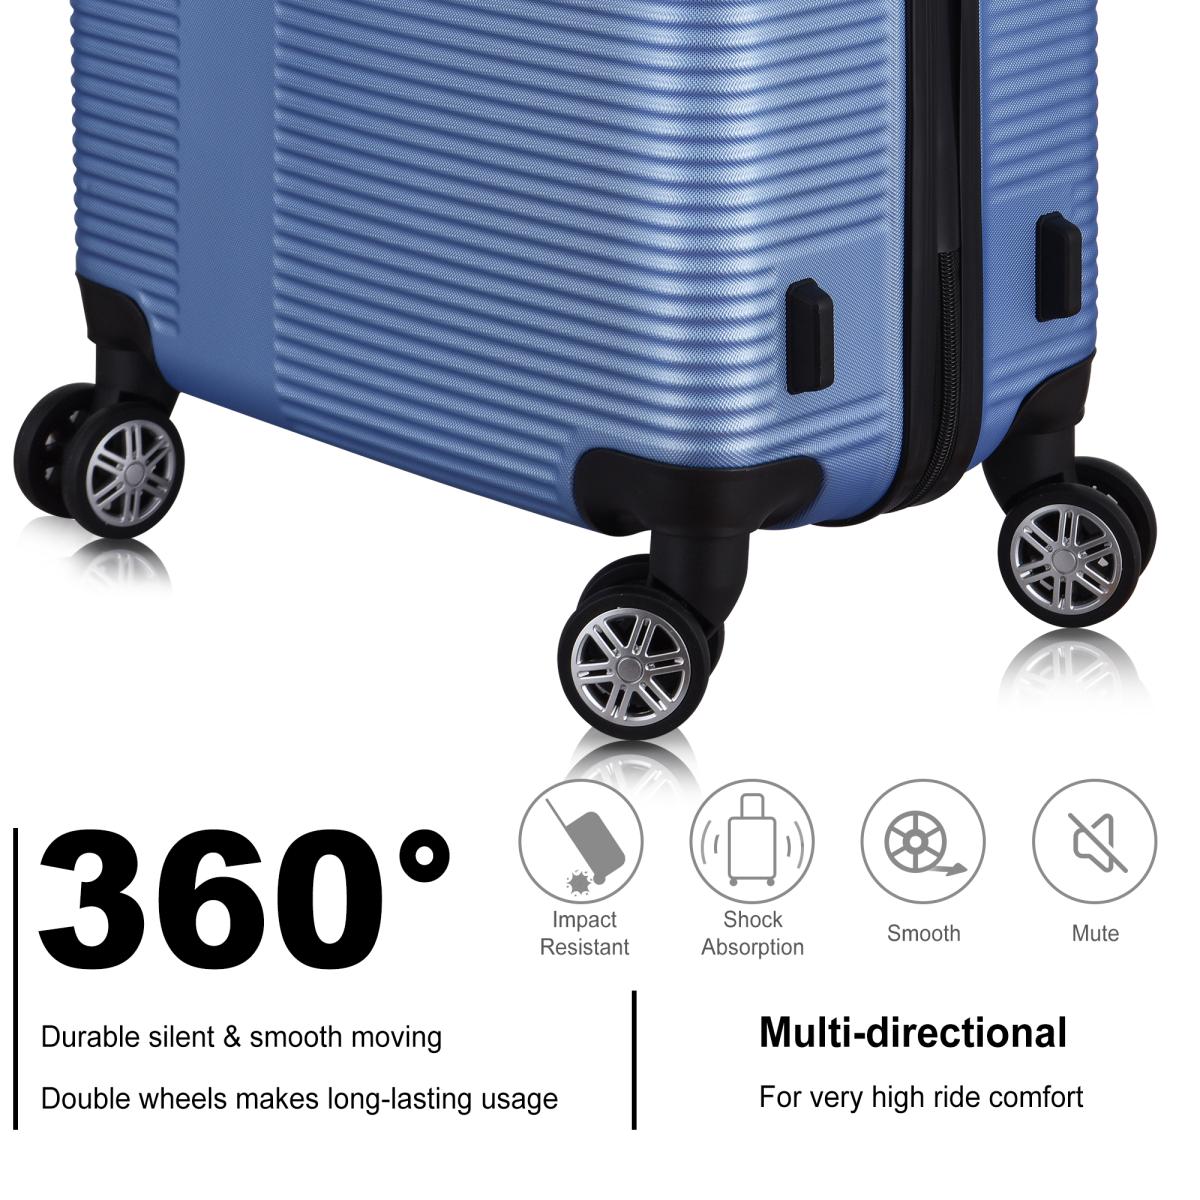 3 Piece Luggage with Tsa Lock Abs, Durable Luggage Set, Lightweight Suitcase with Hooks, Spinner Wheels Cross Stripe Luggage Sets 20in/24in/28in